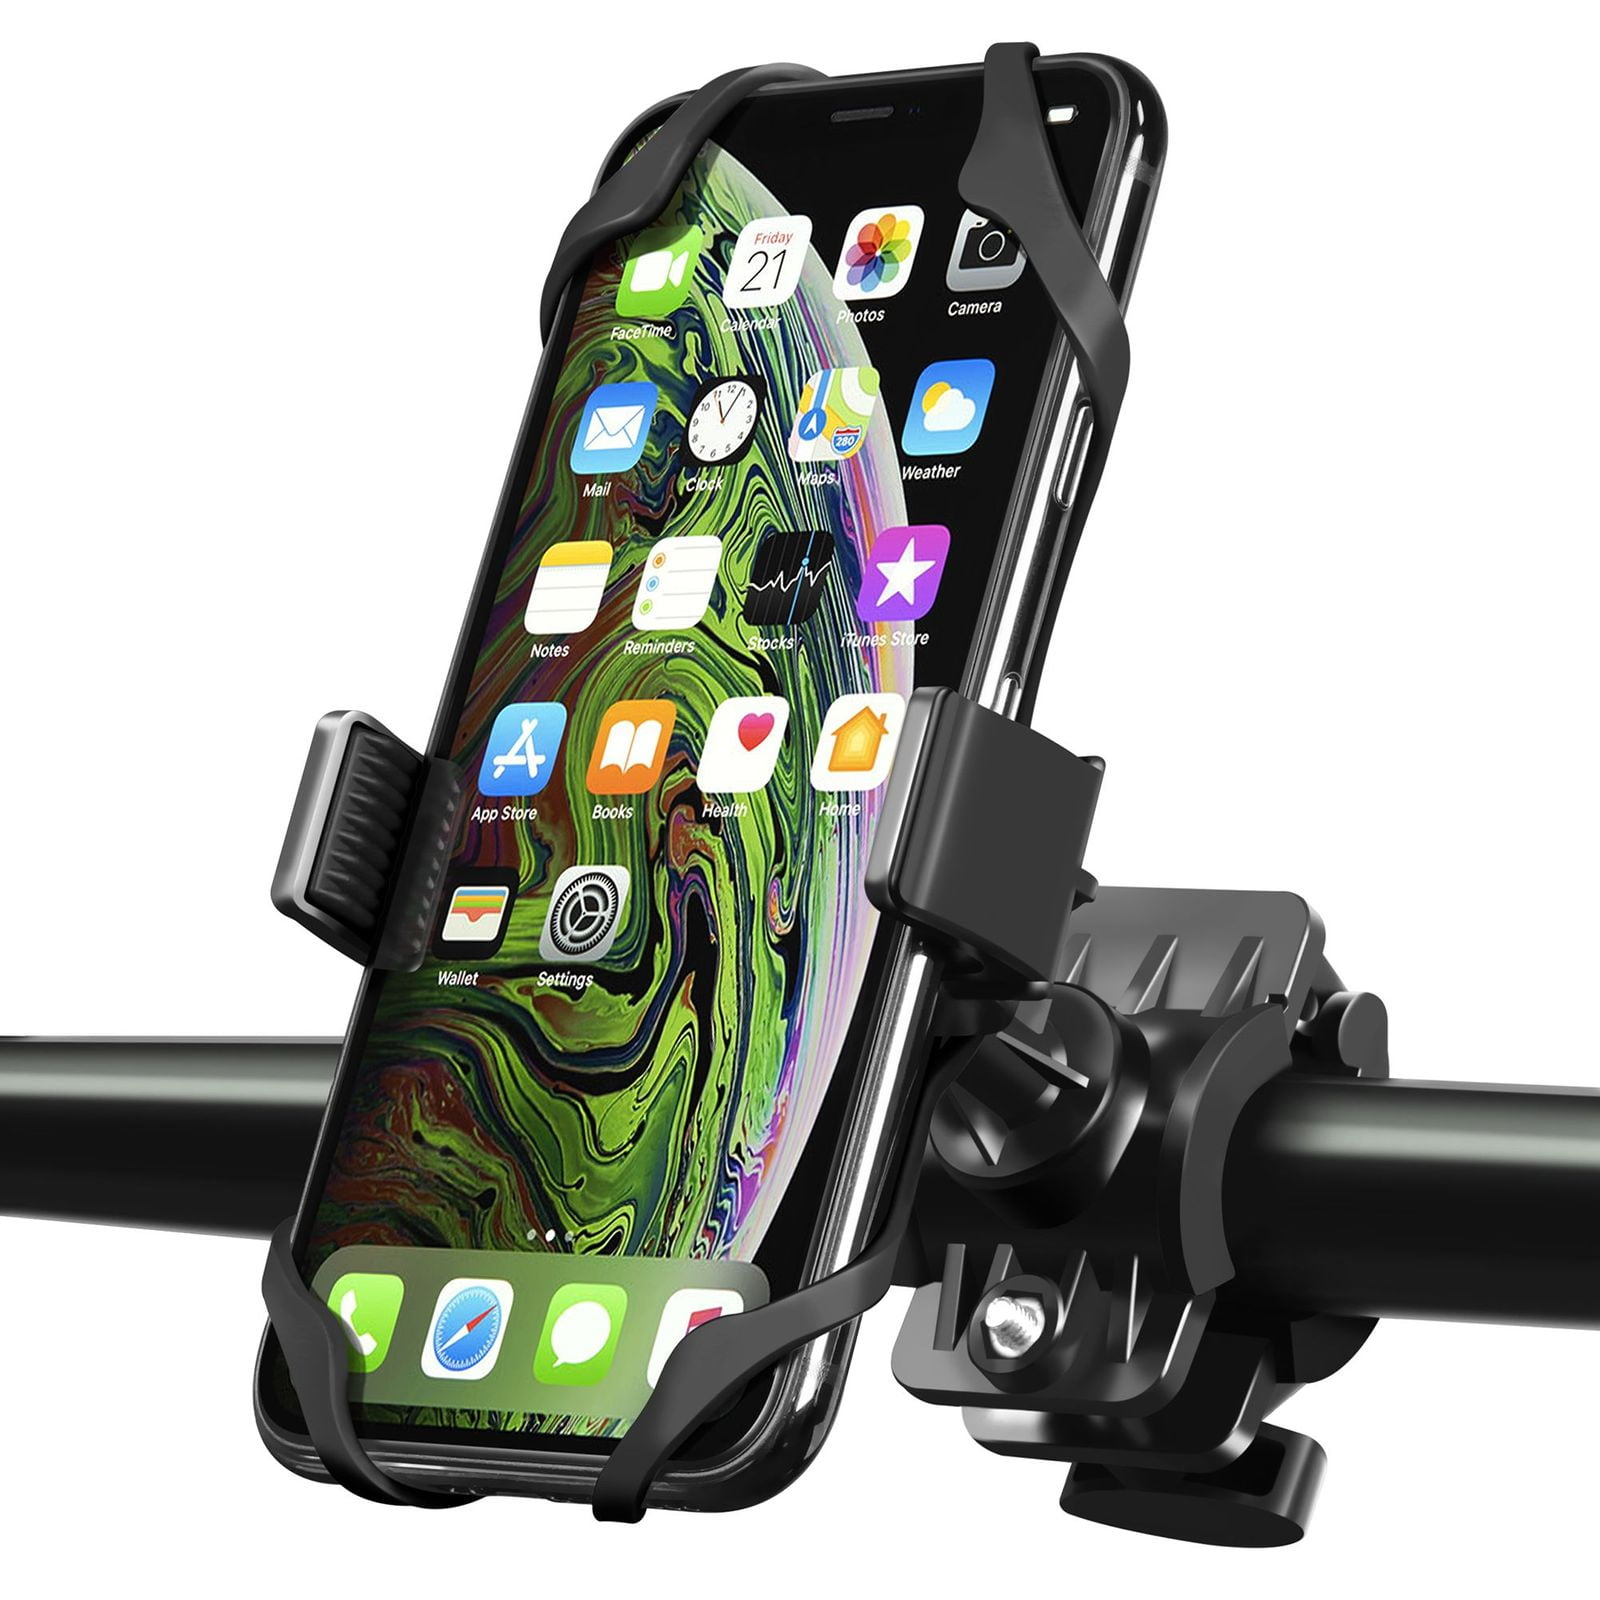 Motorcycle Pro Bike Mount & Charger KIT for iPhone 4 